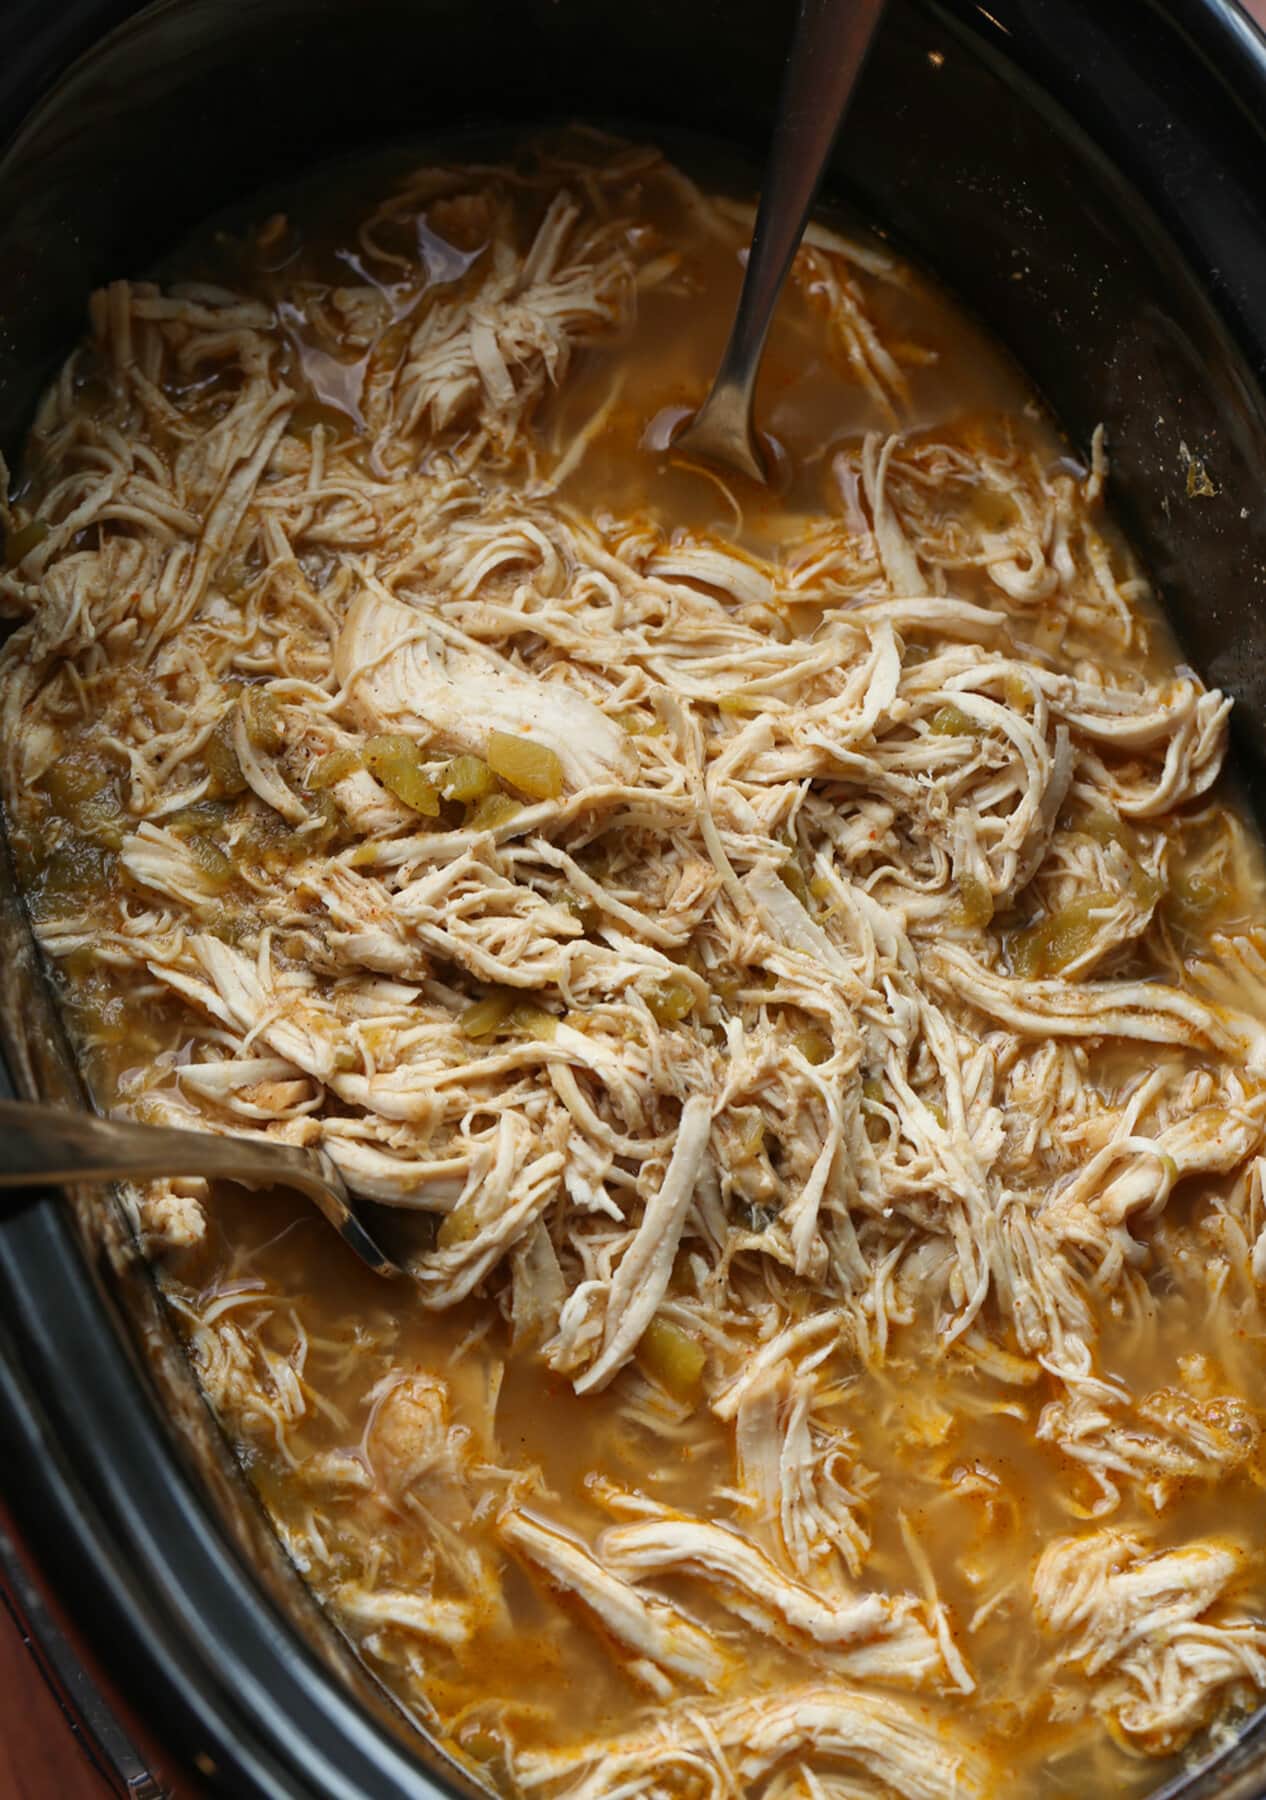 Pulled chicken in a crock pot